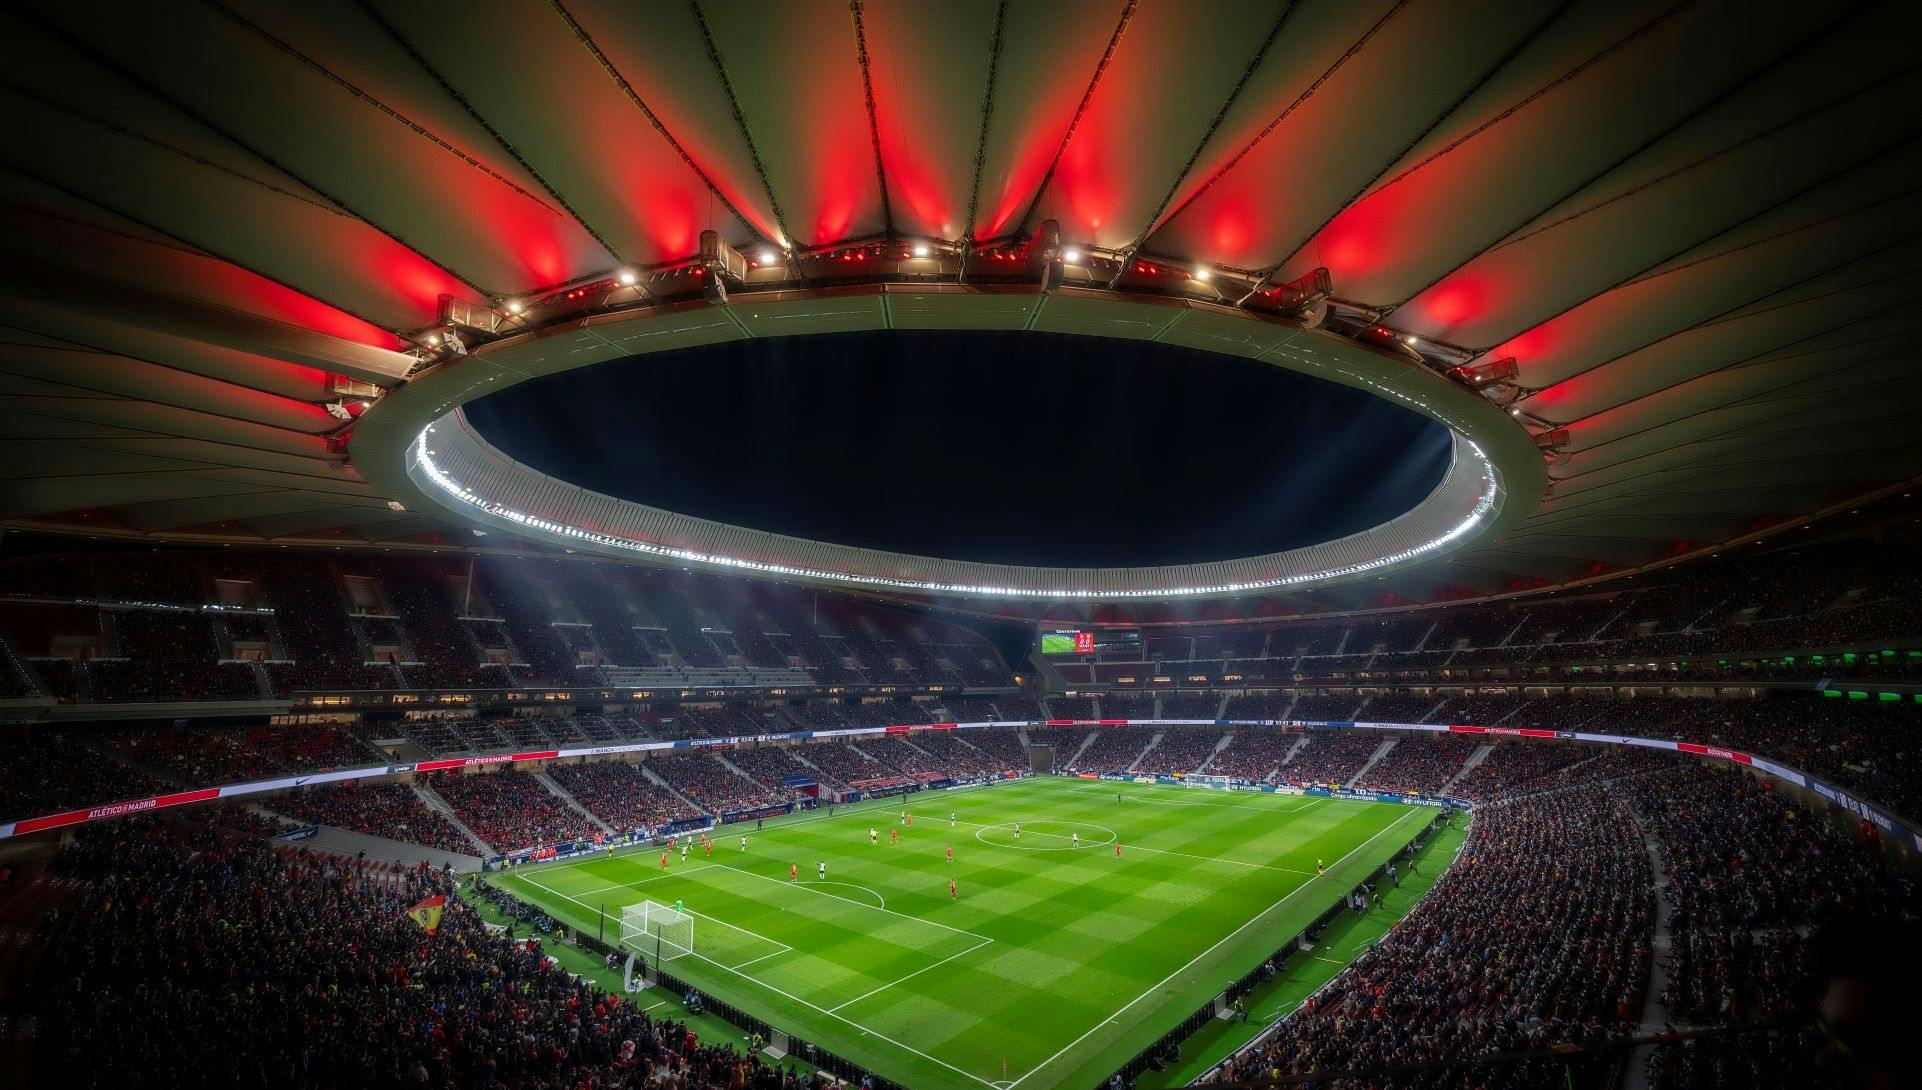 Tickets to the Atlético de Madrid museum and stadium visit Musement